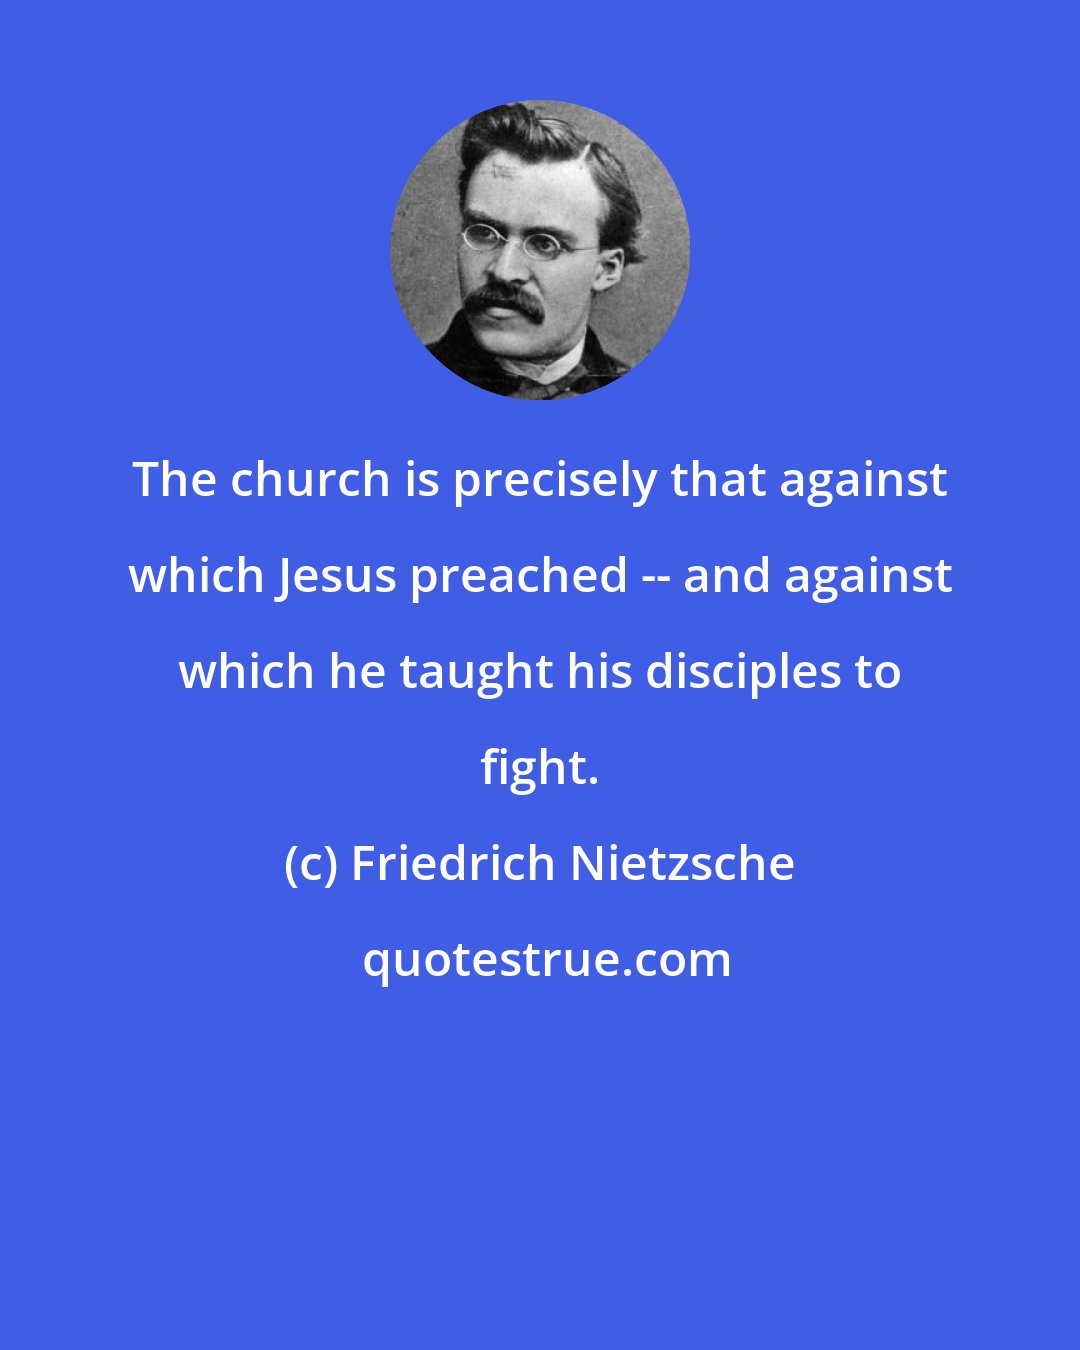 Friedrich Nietzsche: The church is precisely that against which Jesus preached -- and against which he taught his disciples to fight.